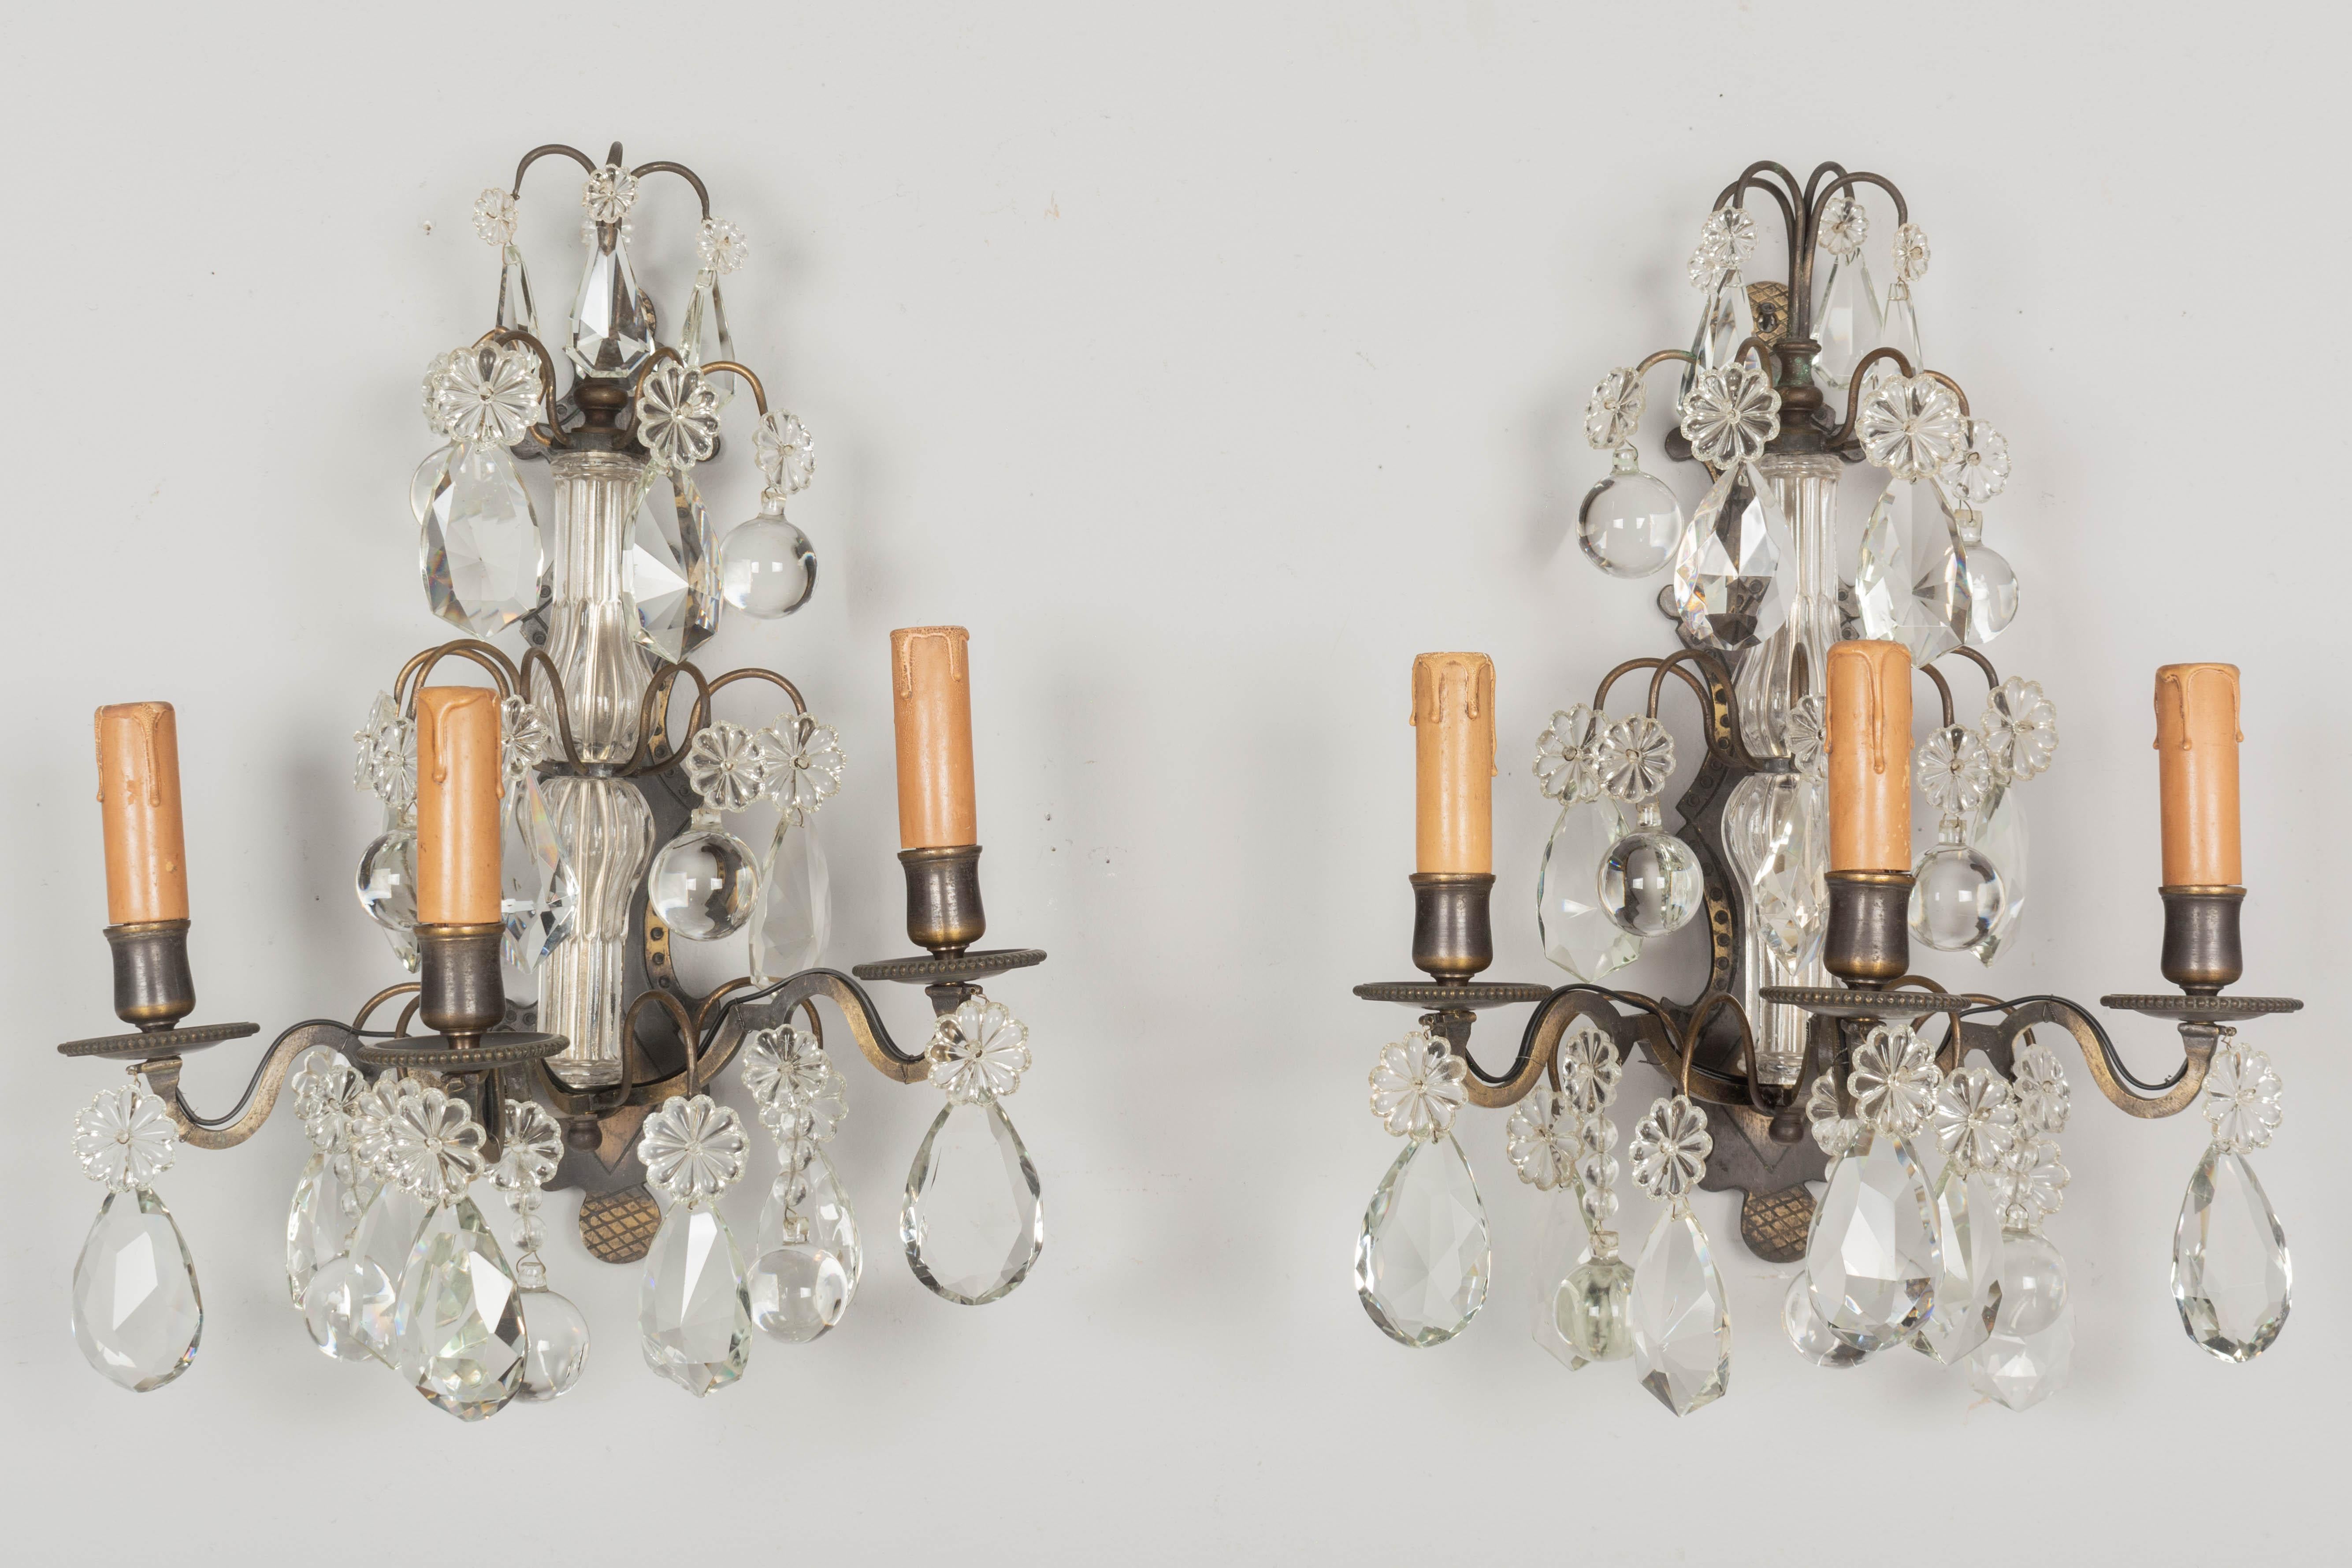 A pair of Louis XV style French Art Deco Period cast brass three light crystal sconces a variety of large cut crystal prisms and pendalogues with rosettes. Good quality heavy casting with dark patina. Rewired using the original sockets with US